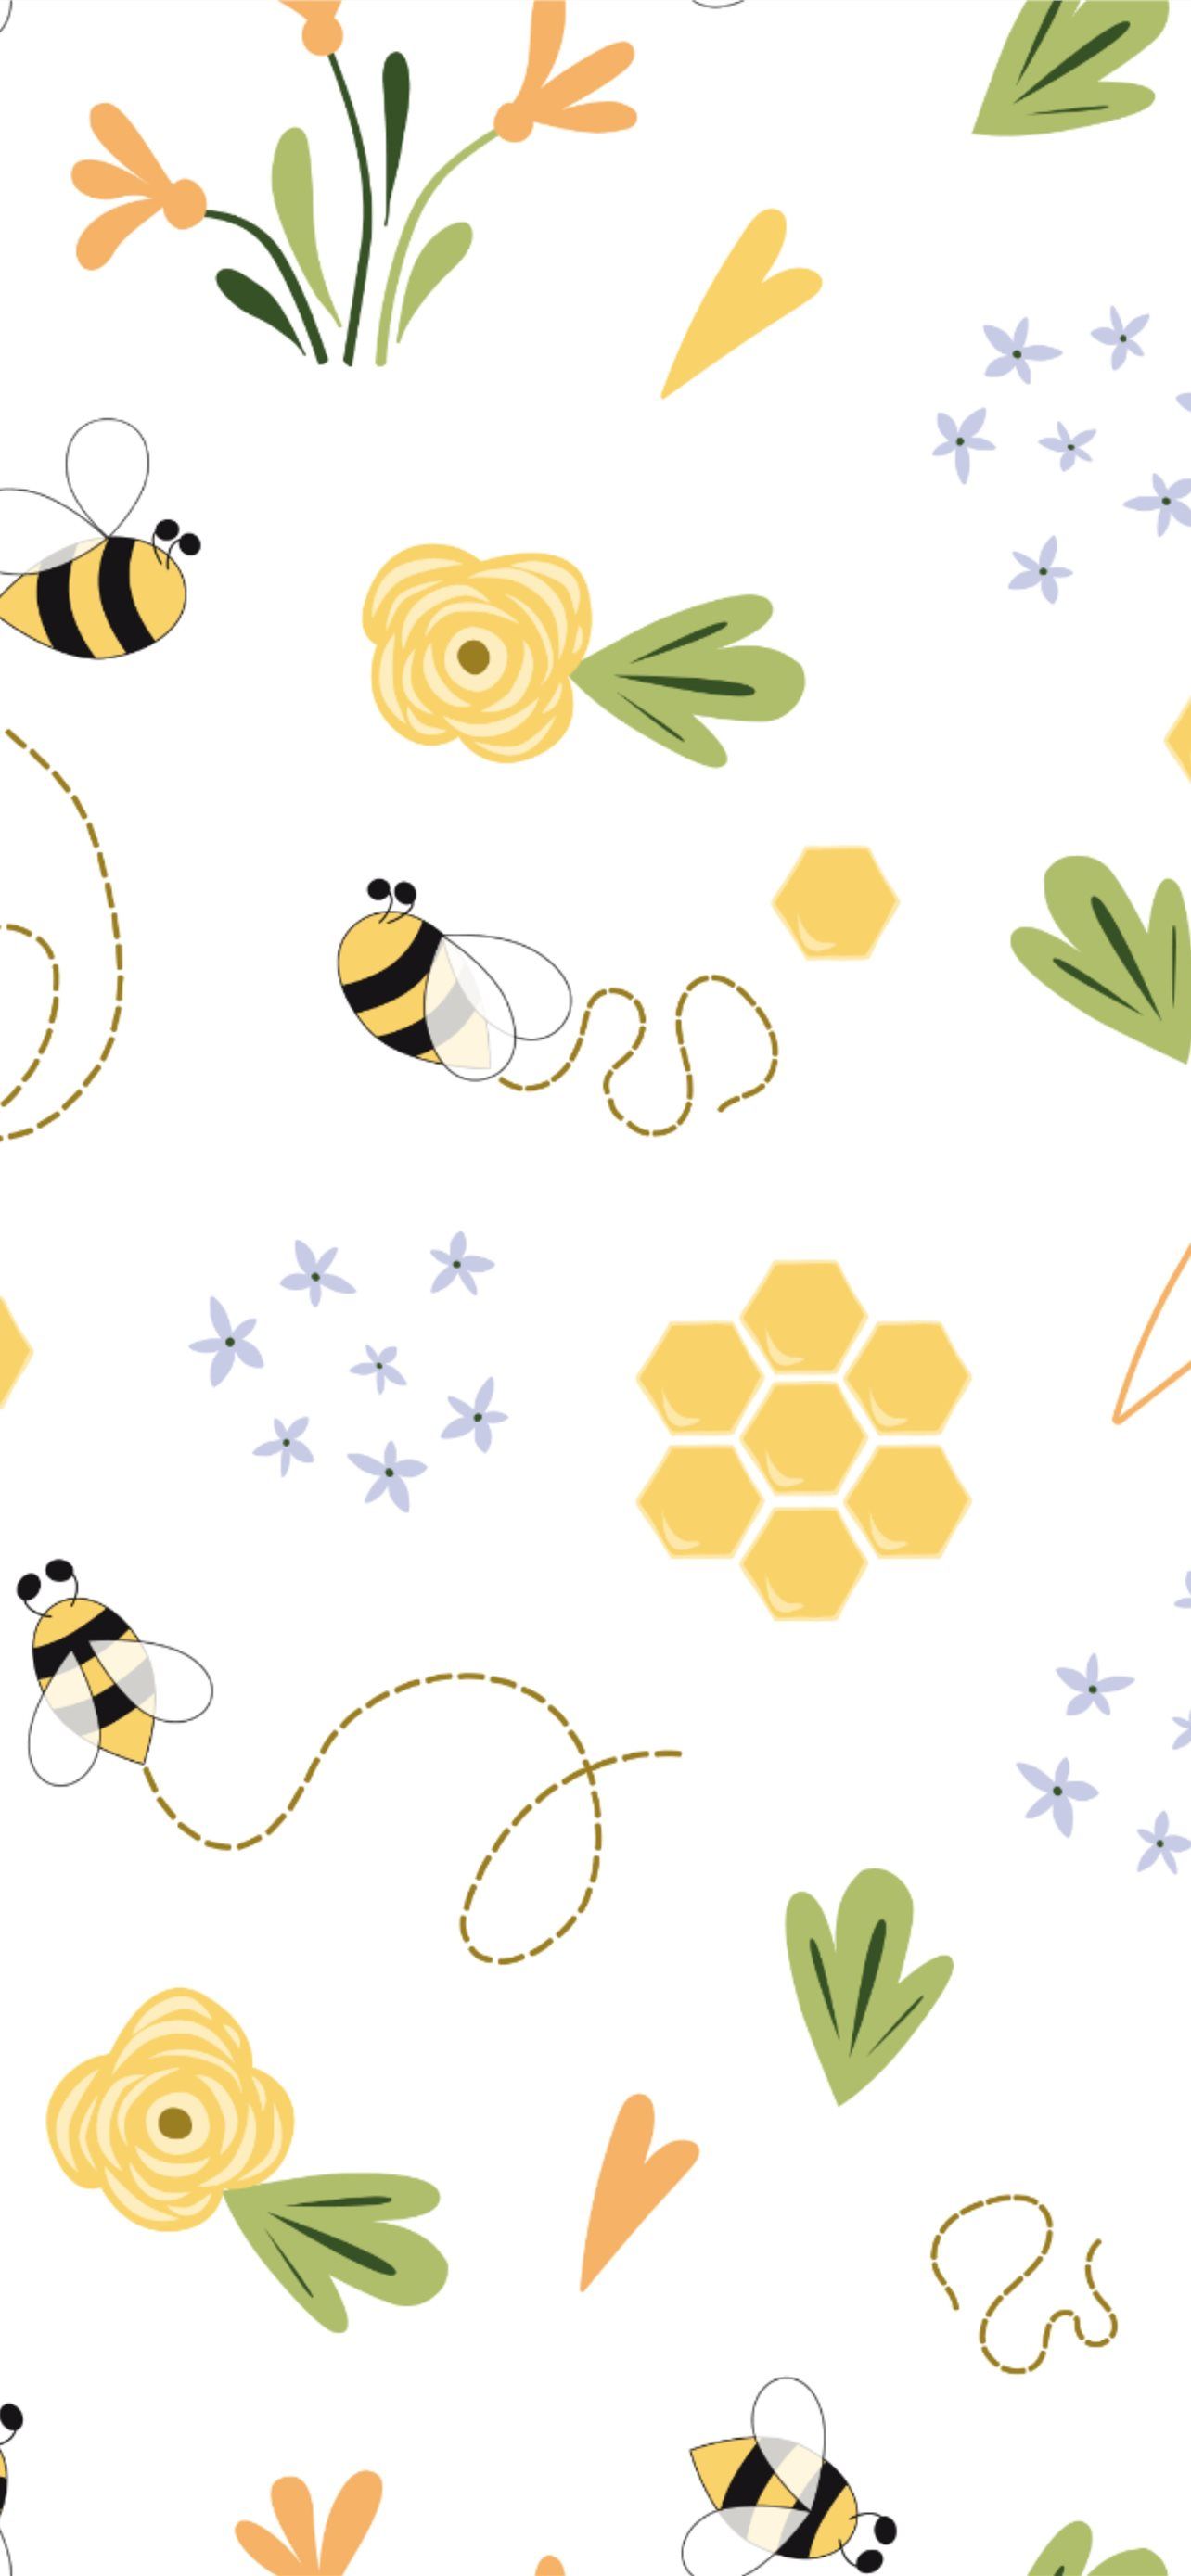 A pattern of flowers, bees and leaves - Bee, honey